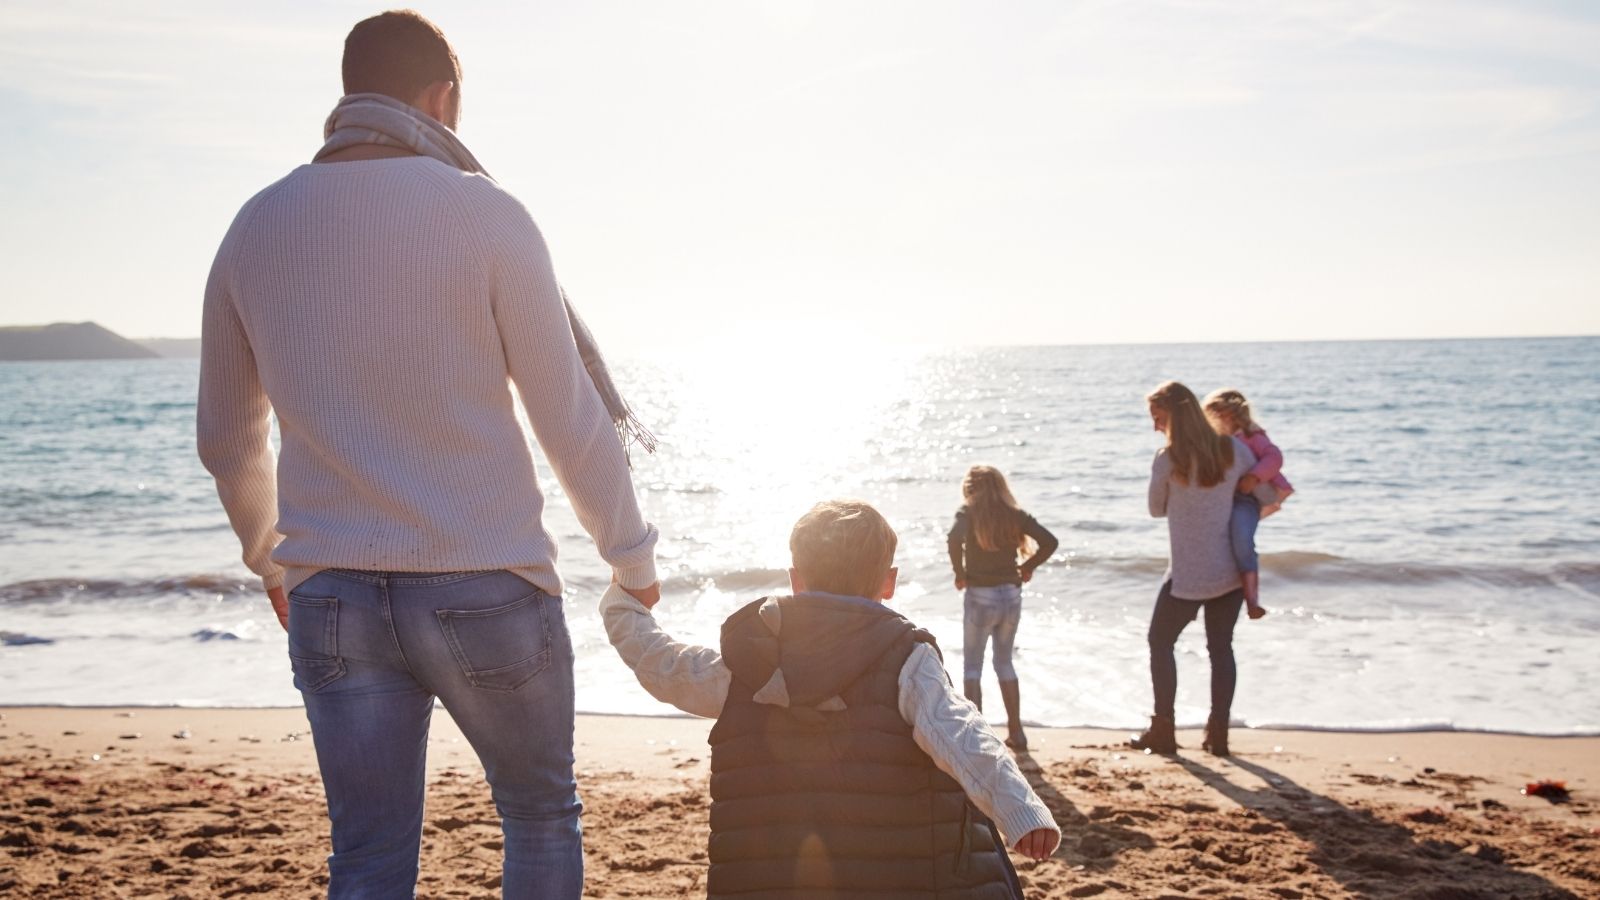 Family on a fall beach vacation (Photo: Shutterstock)